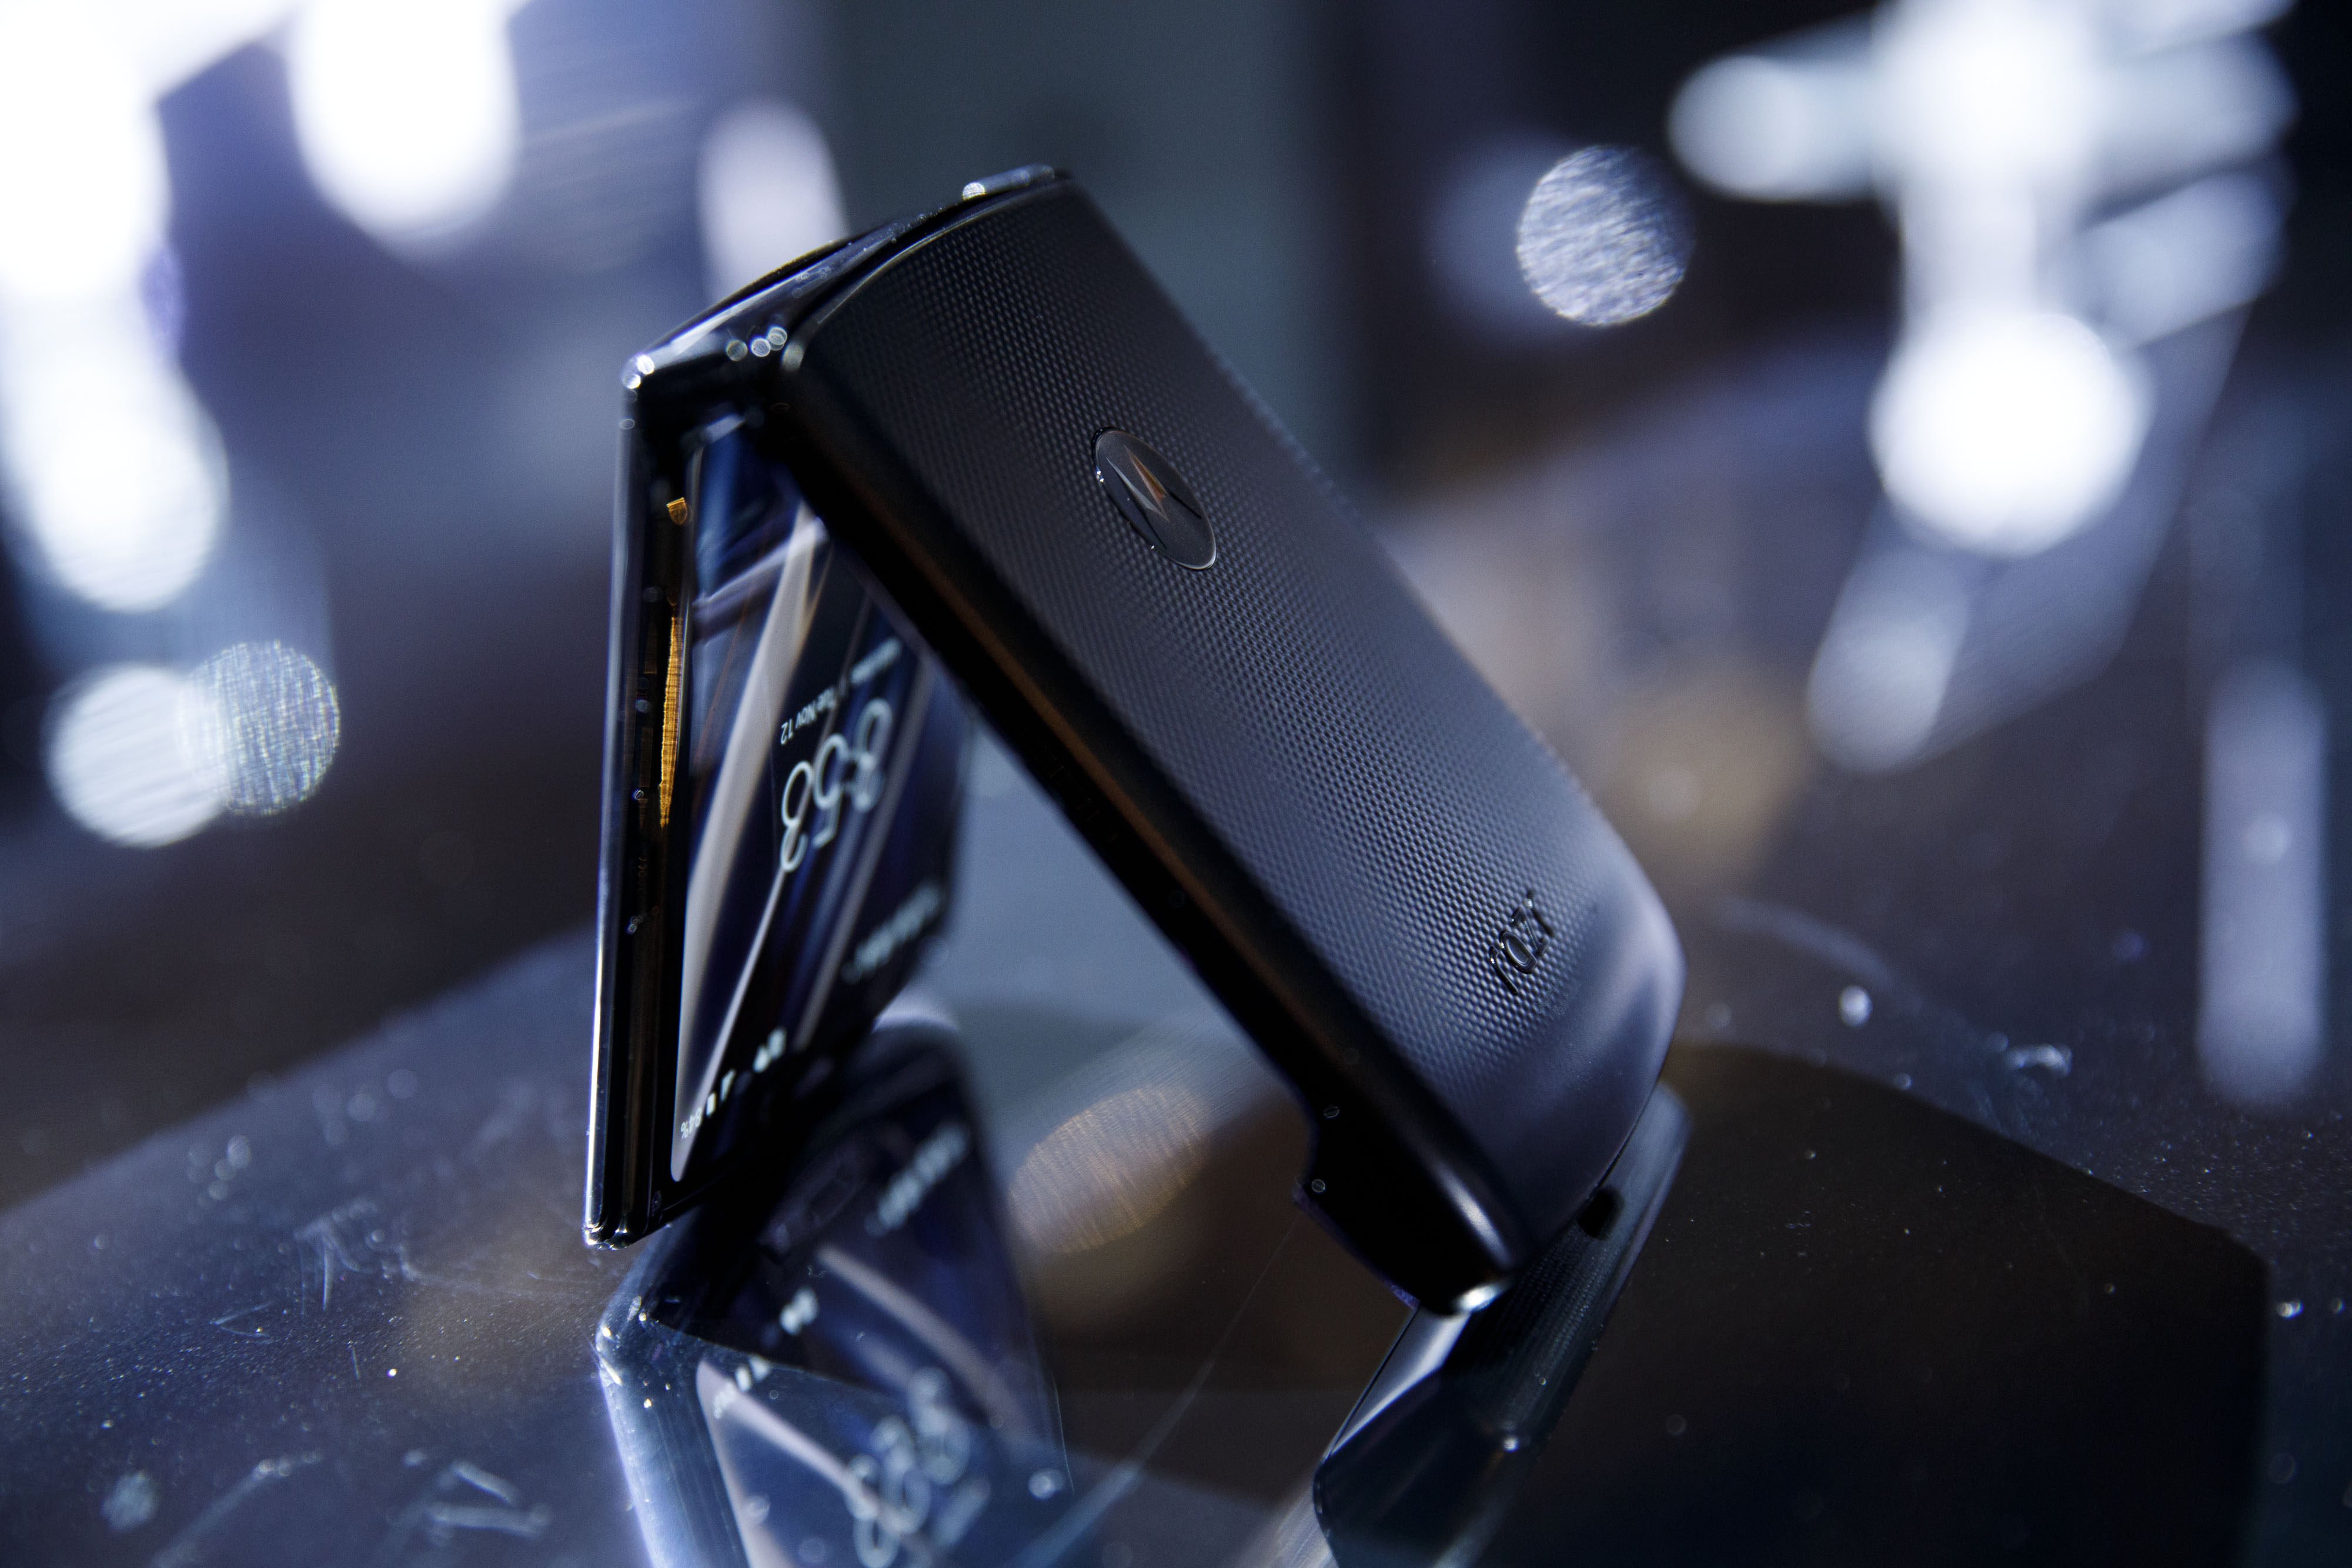 A Motorola Razr smartphone is displayed during an event in Los Angeles, Nov. 13, 2019. Photo: Bloomberg